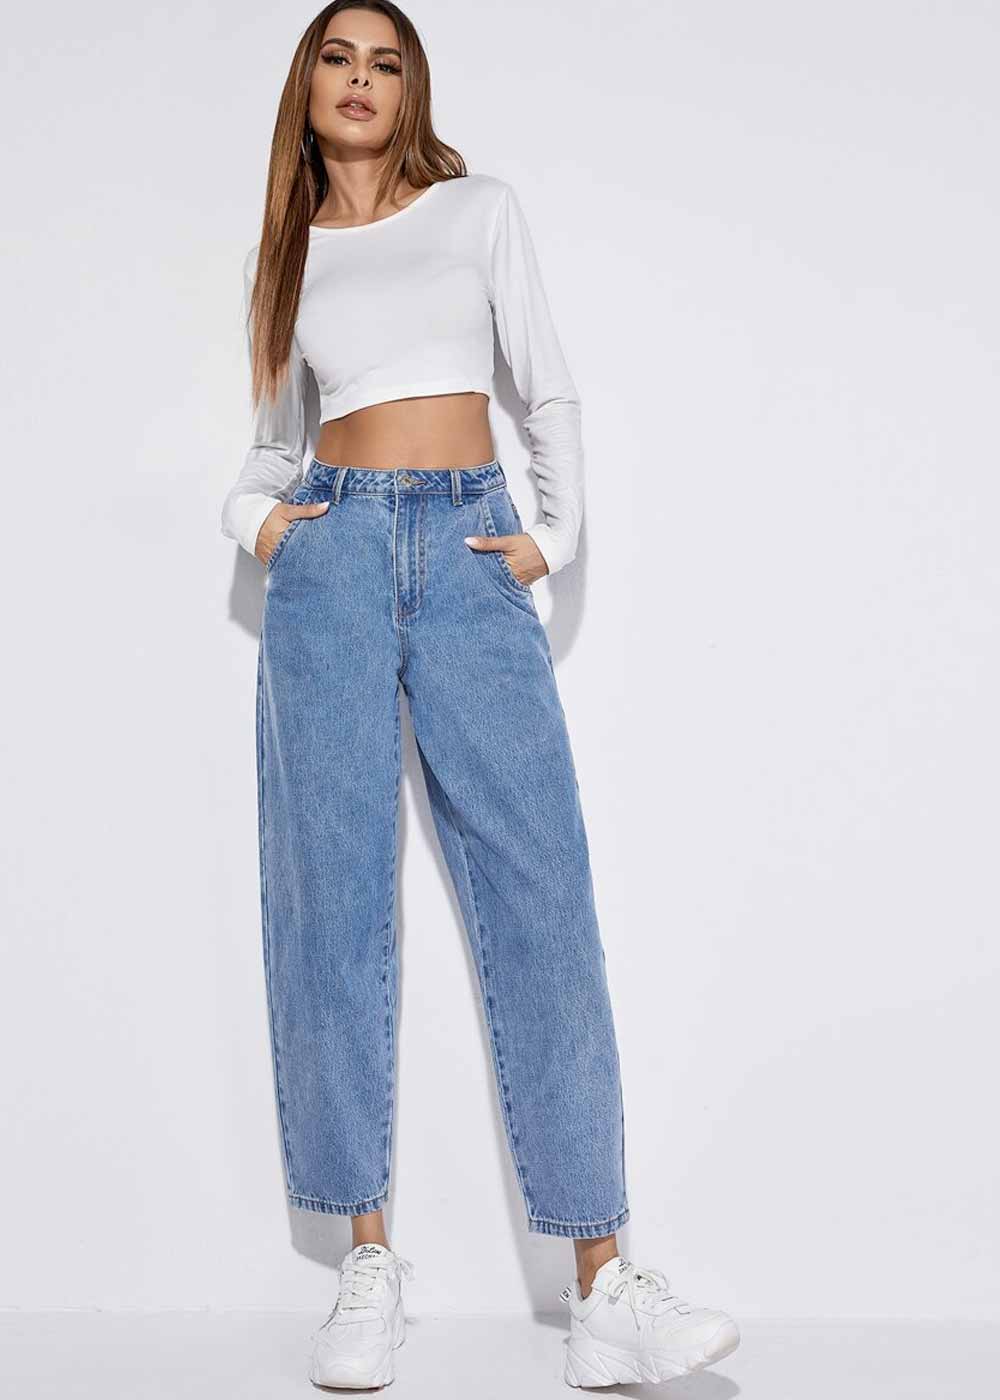 Mom jeans 2021